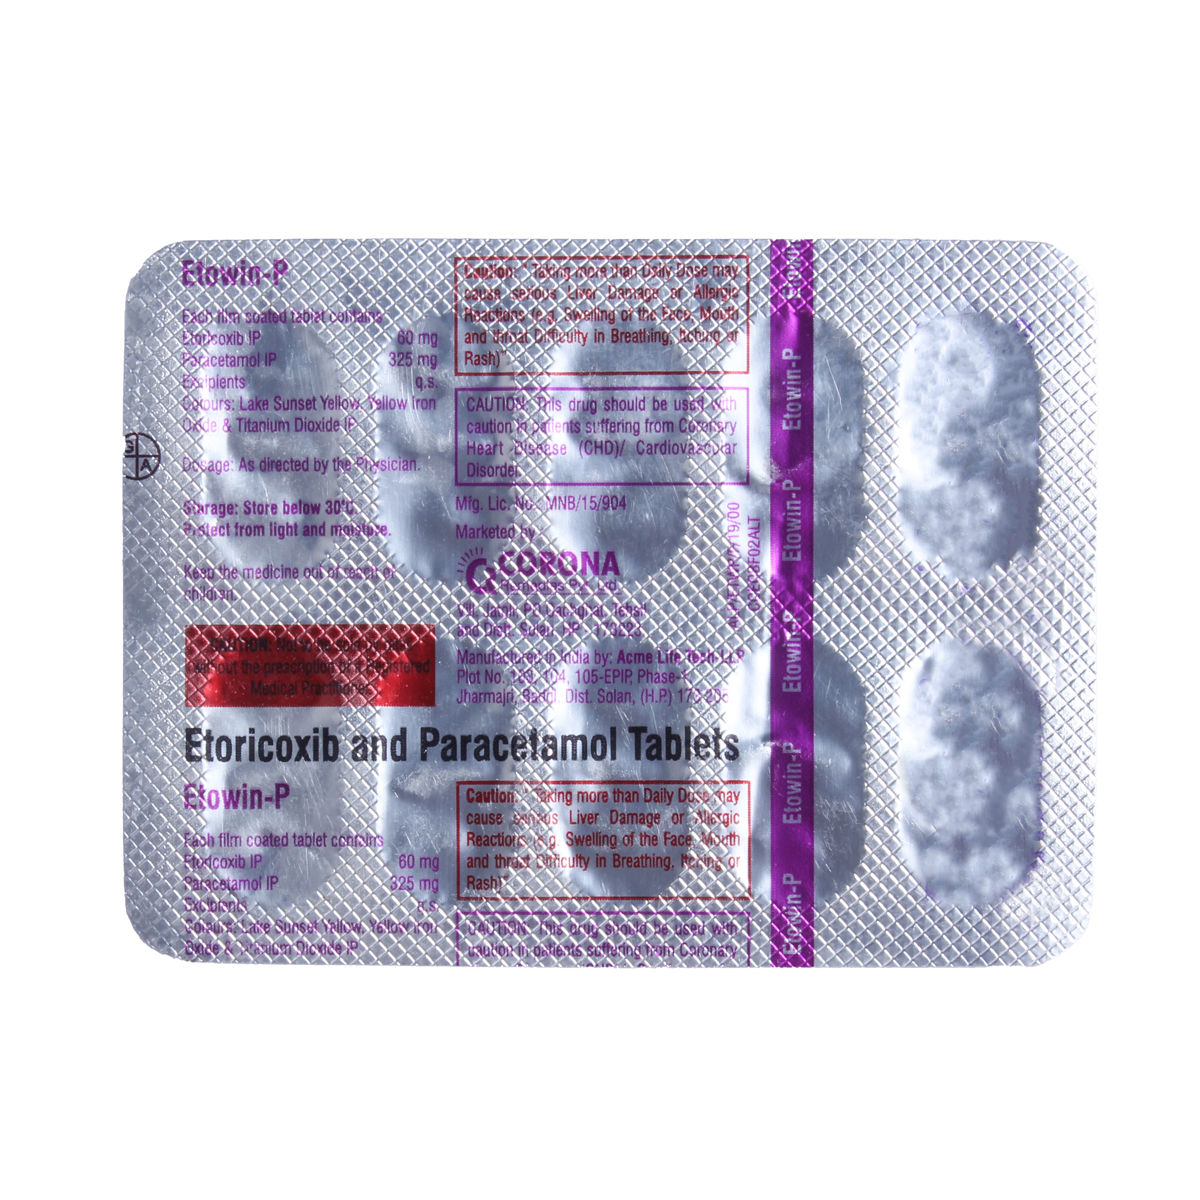 Etowin-P Tablet 10's Price, Uses, Side Effects, Composition ...